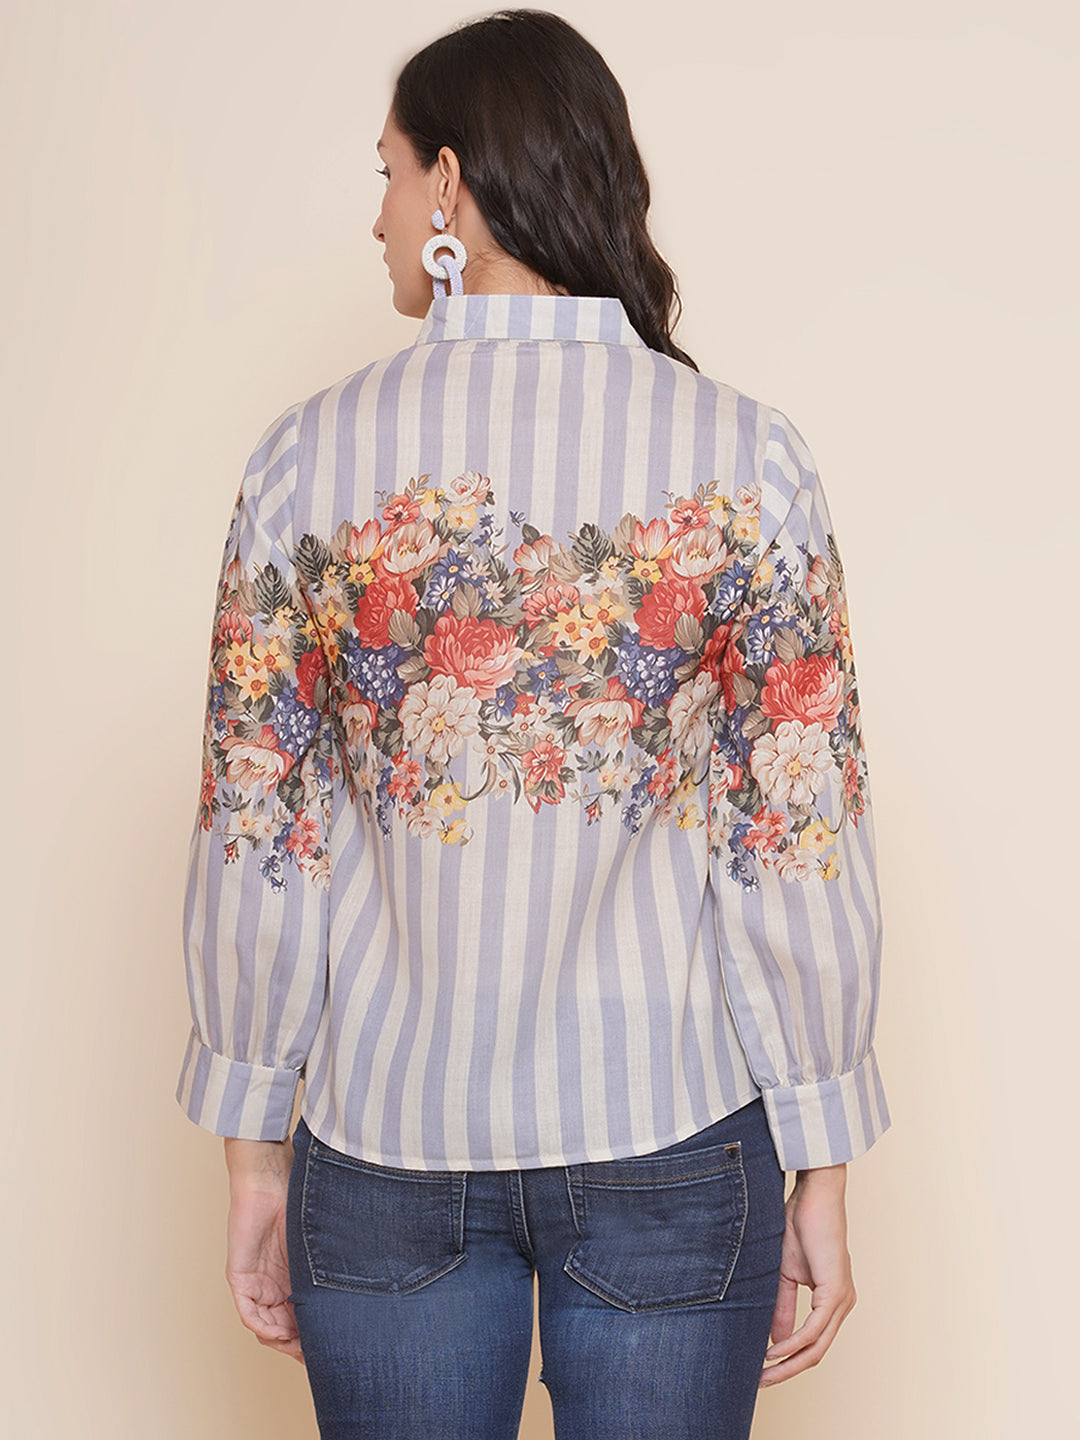 Bhama Couture Grey Floral Printed Shirt Style Top